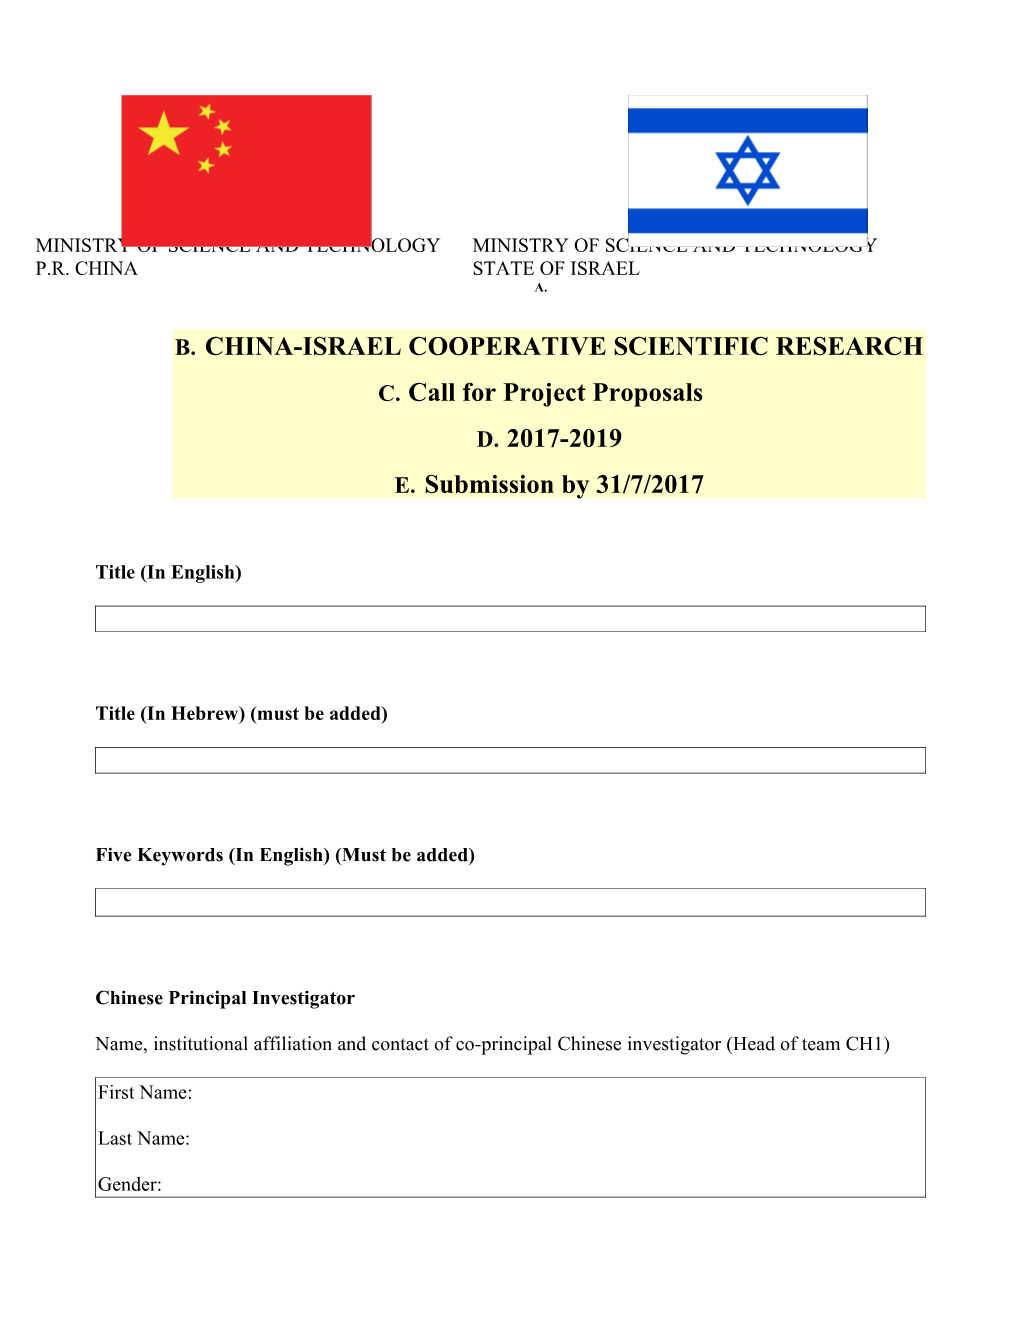 Form-Call for Proposals-China-Israel 2017-2019